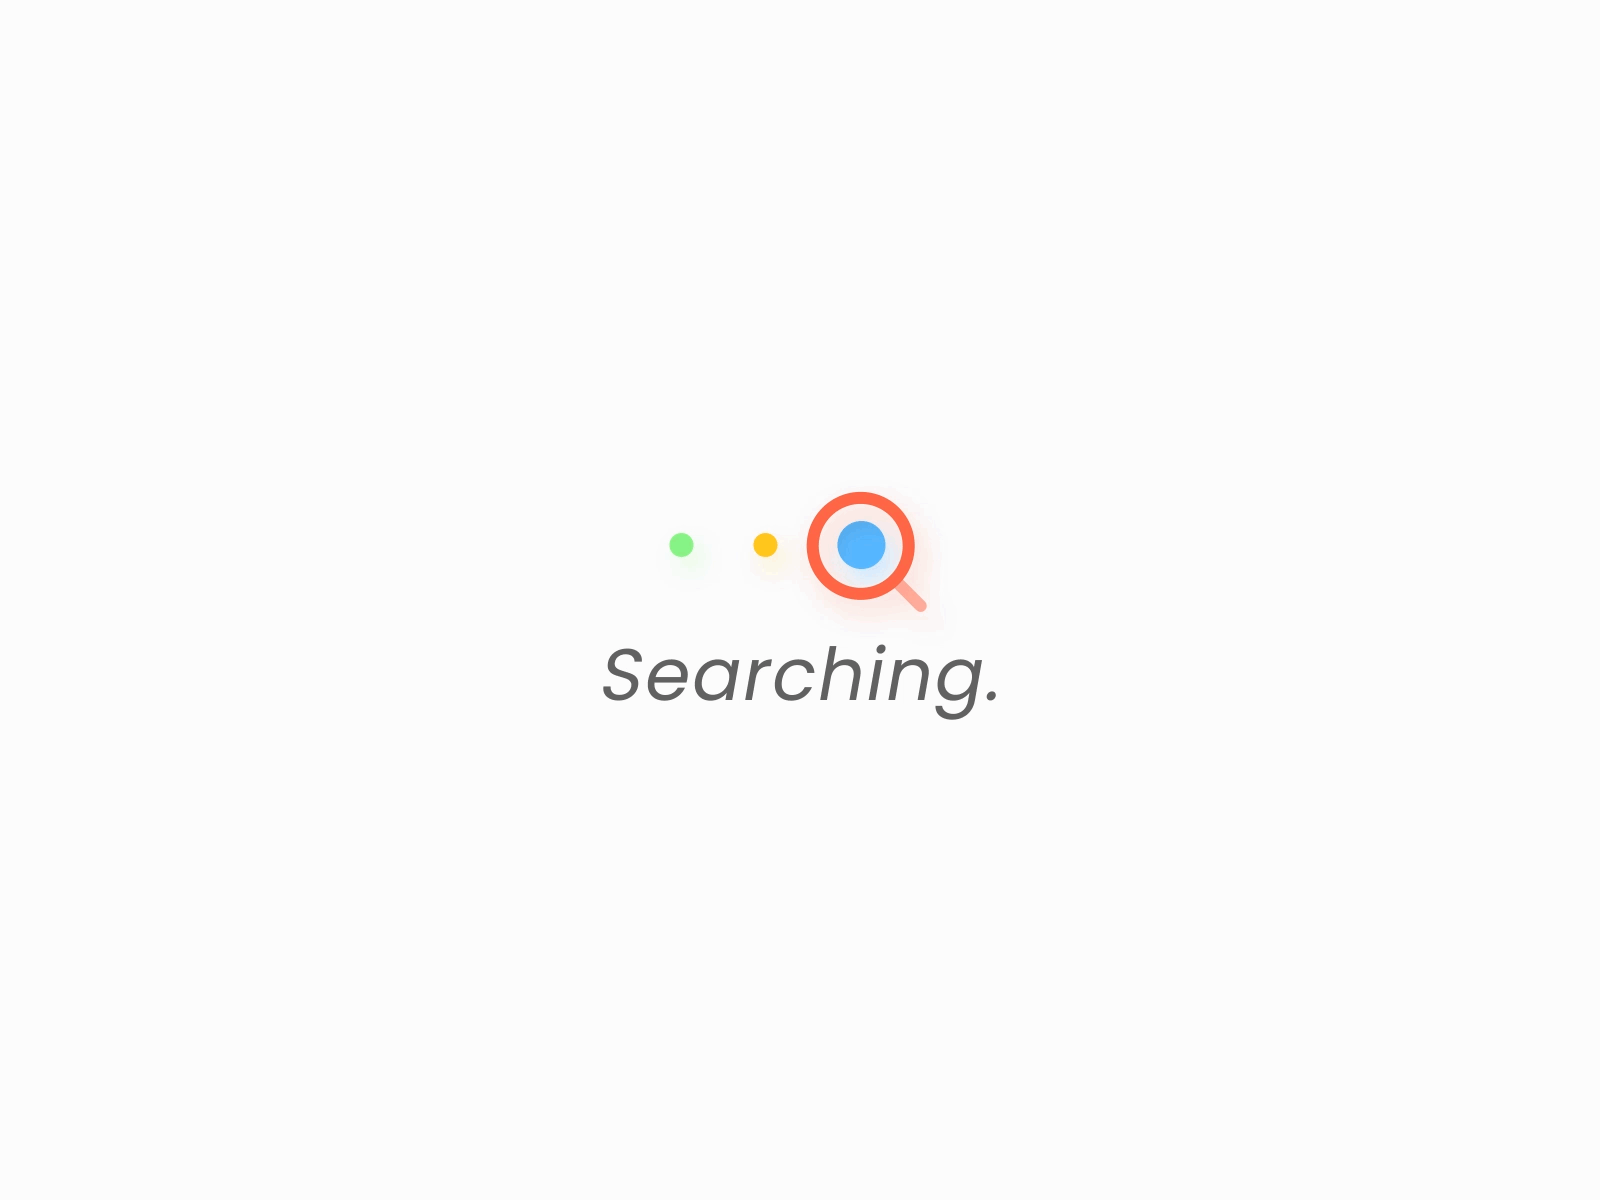 Searching - Animated Icons animated icon animation icon motion graphics search searching